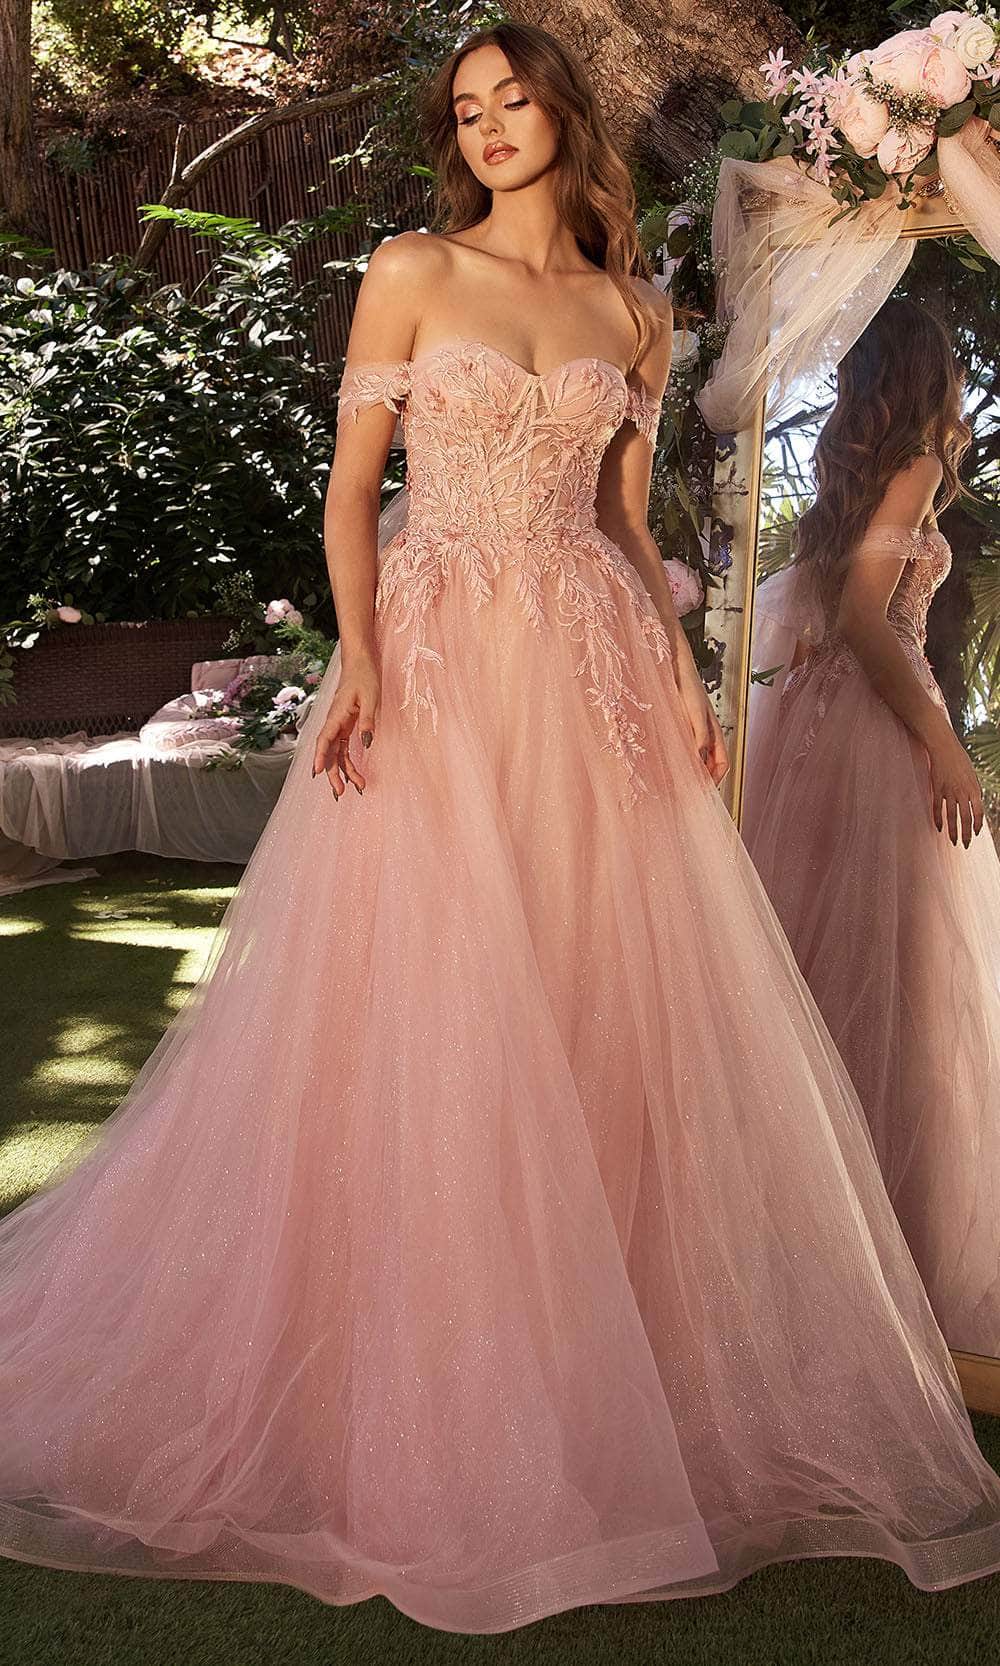 Andrea And Leo A1322 - Lace Appliqued Evening Dress 2 / Dusty Rose